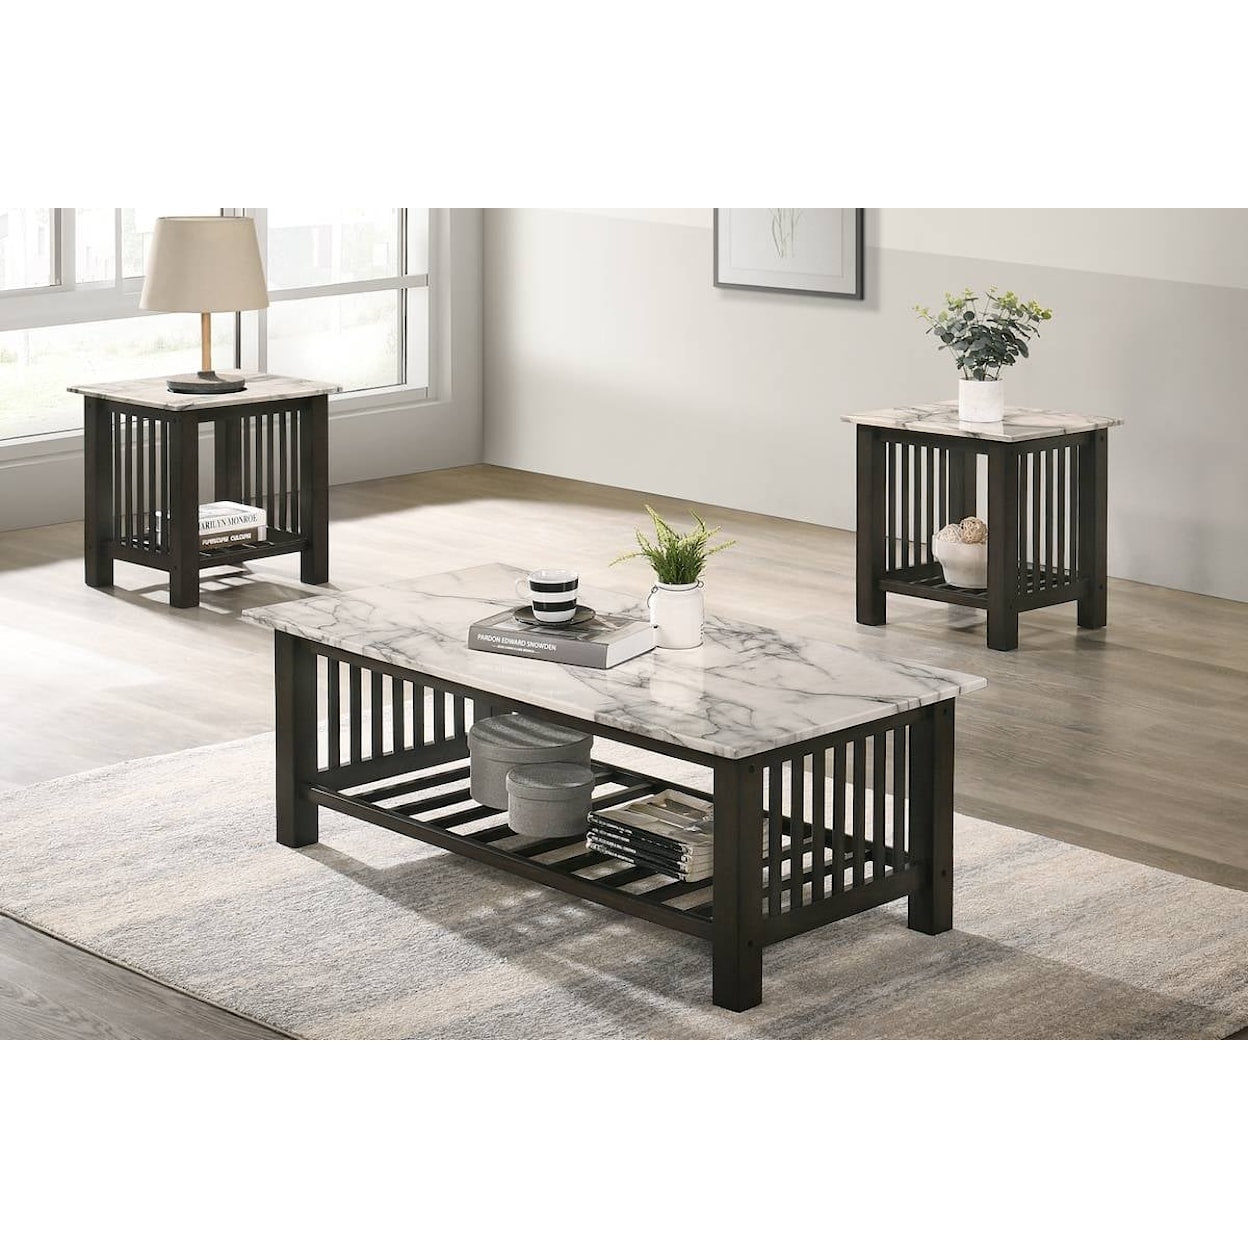 Poundex Occasional Tables MAREN WHITE COFFEE TABLE |